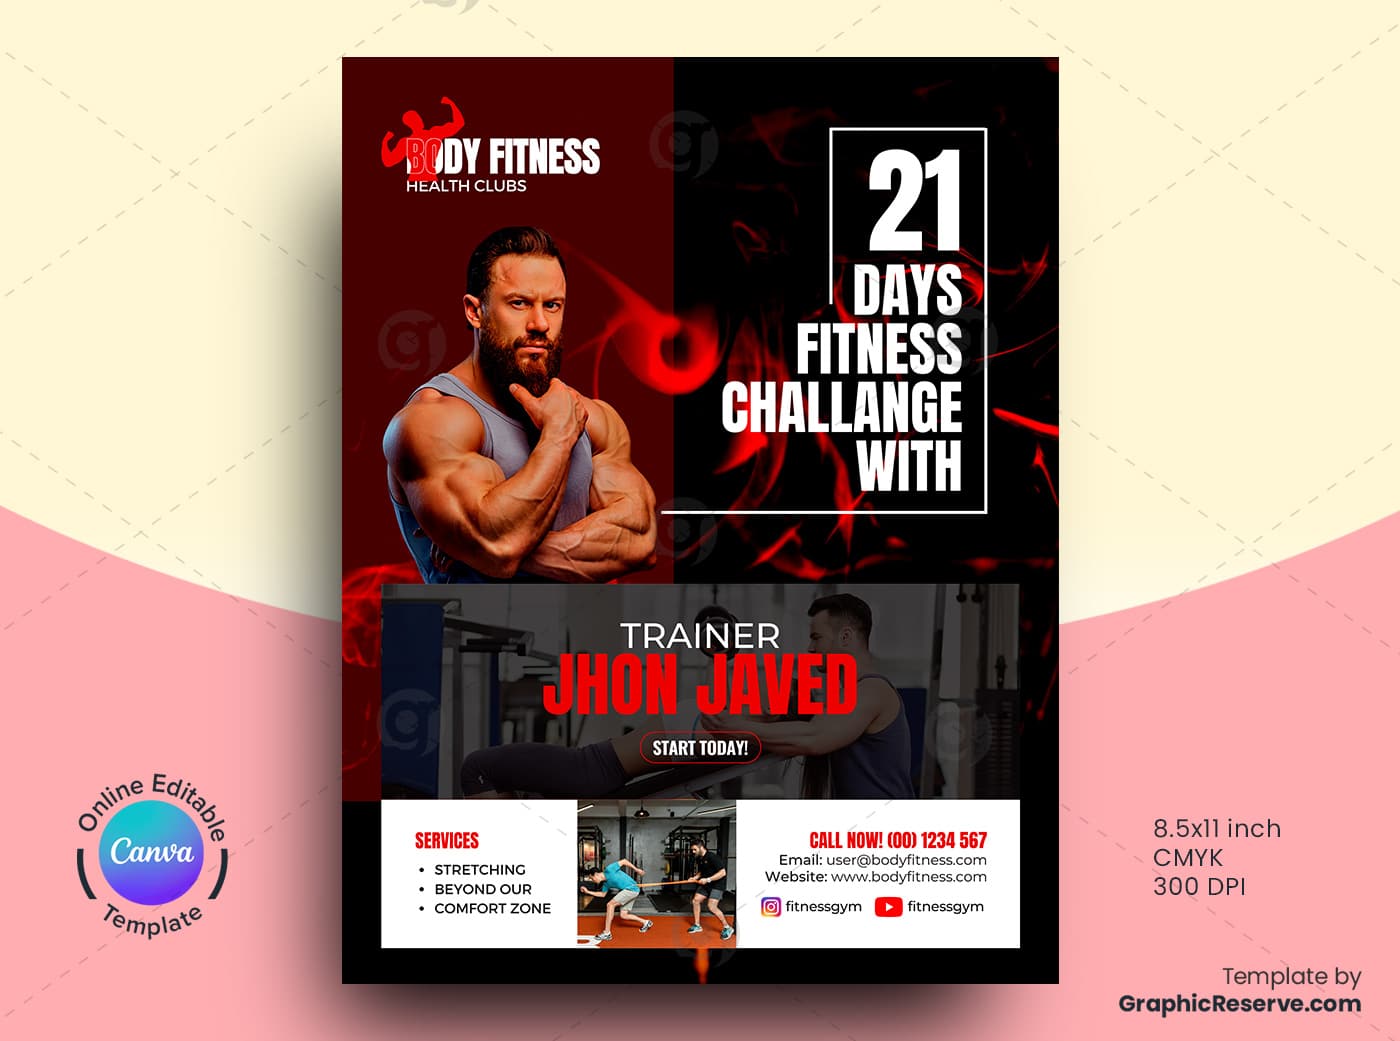 Fitness Trainer Marketing Material Bundle Canva Template - Graphic